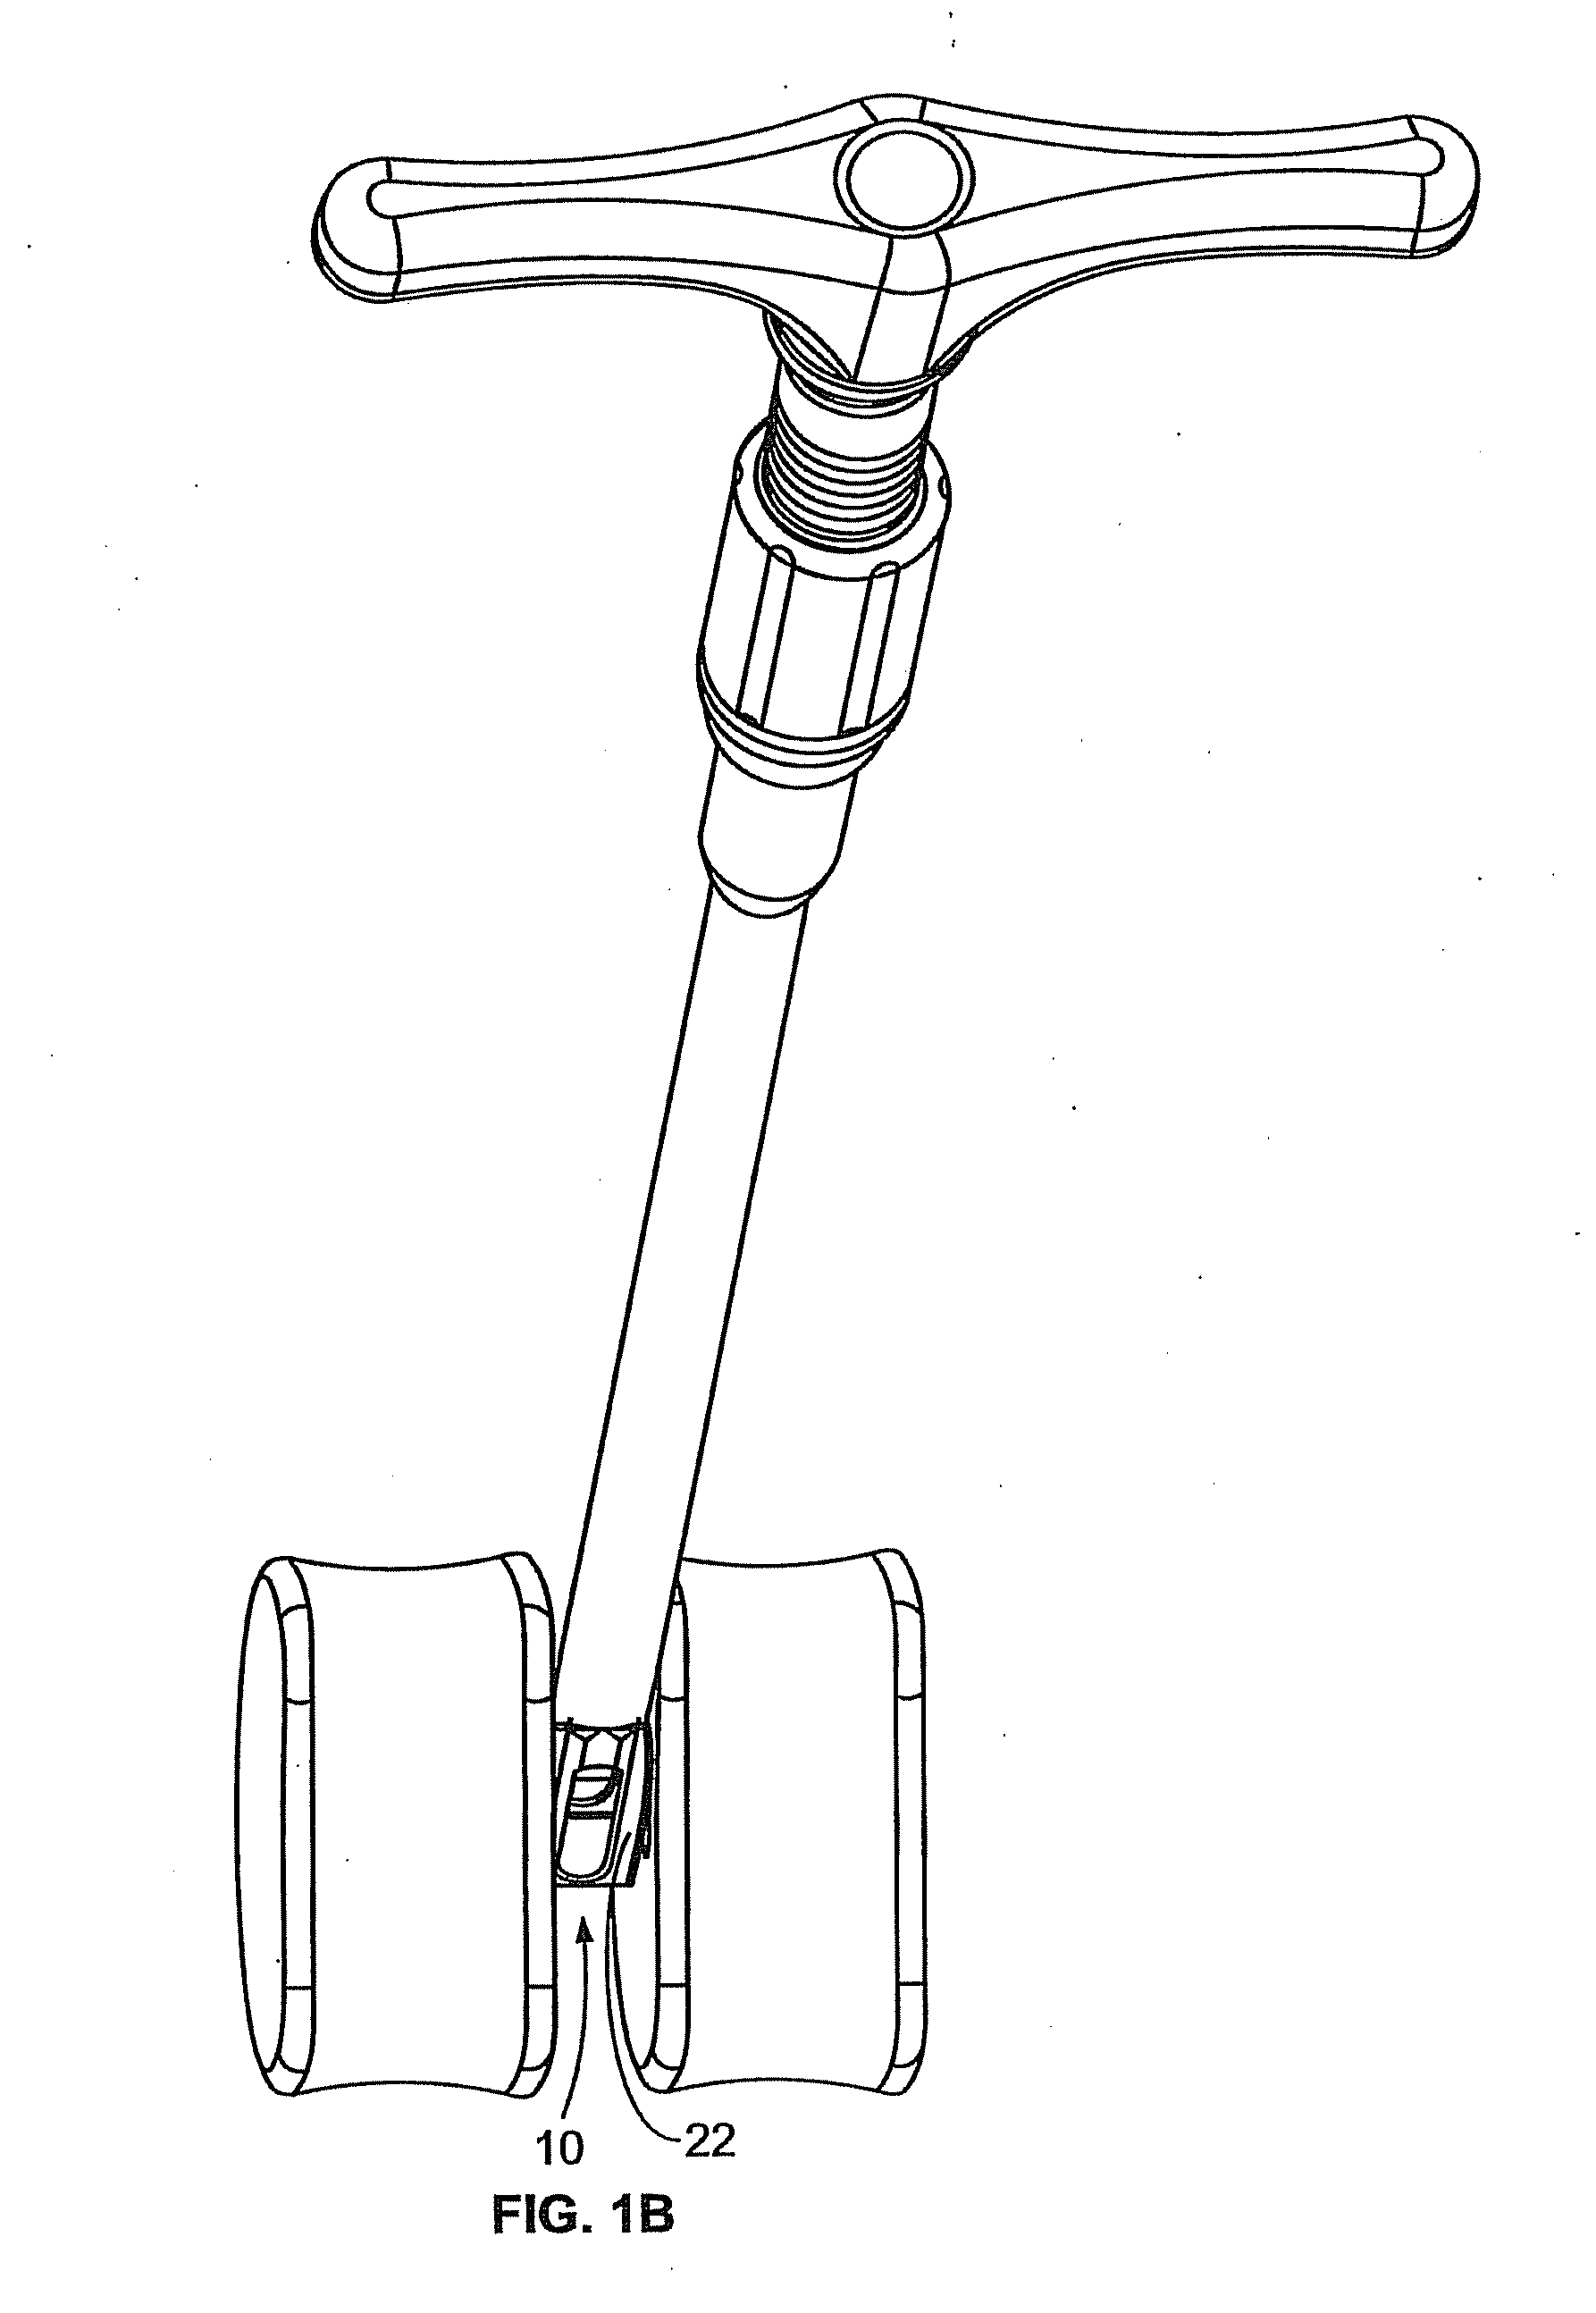 Methods and Systems for Interbody Implant and Bone Graft Delivery